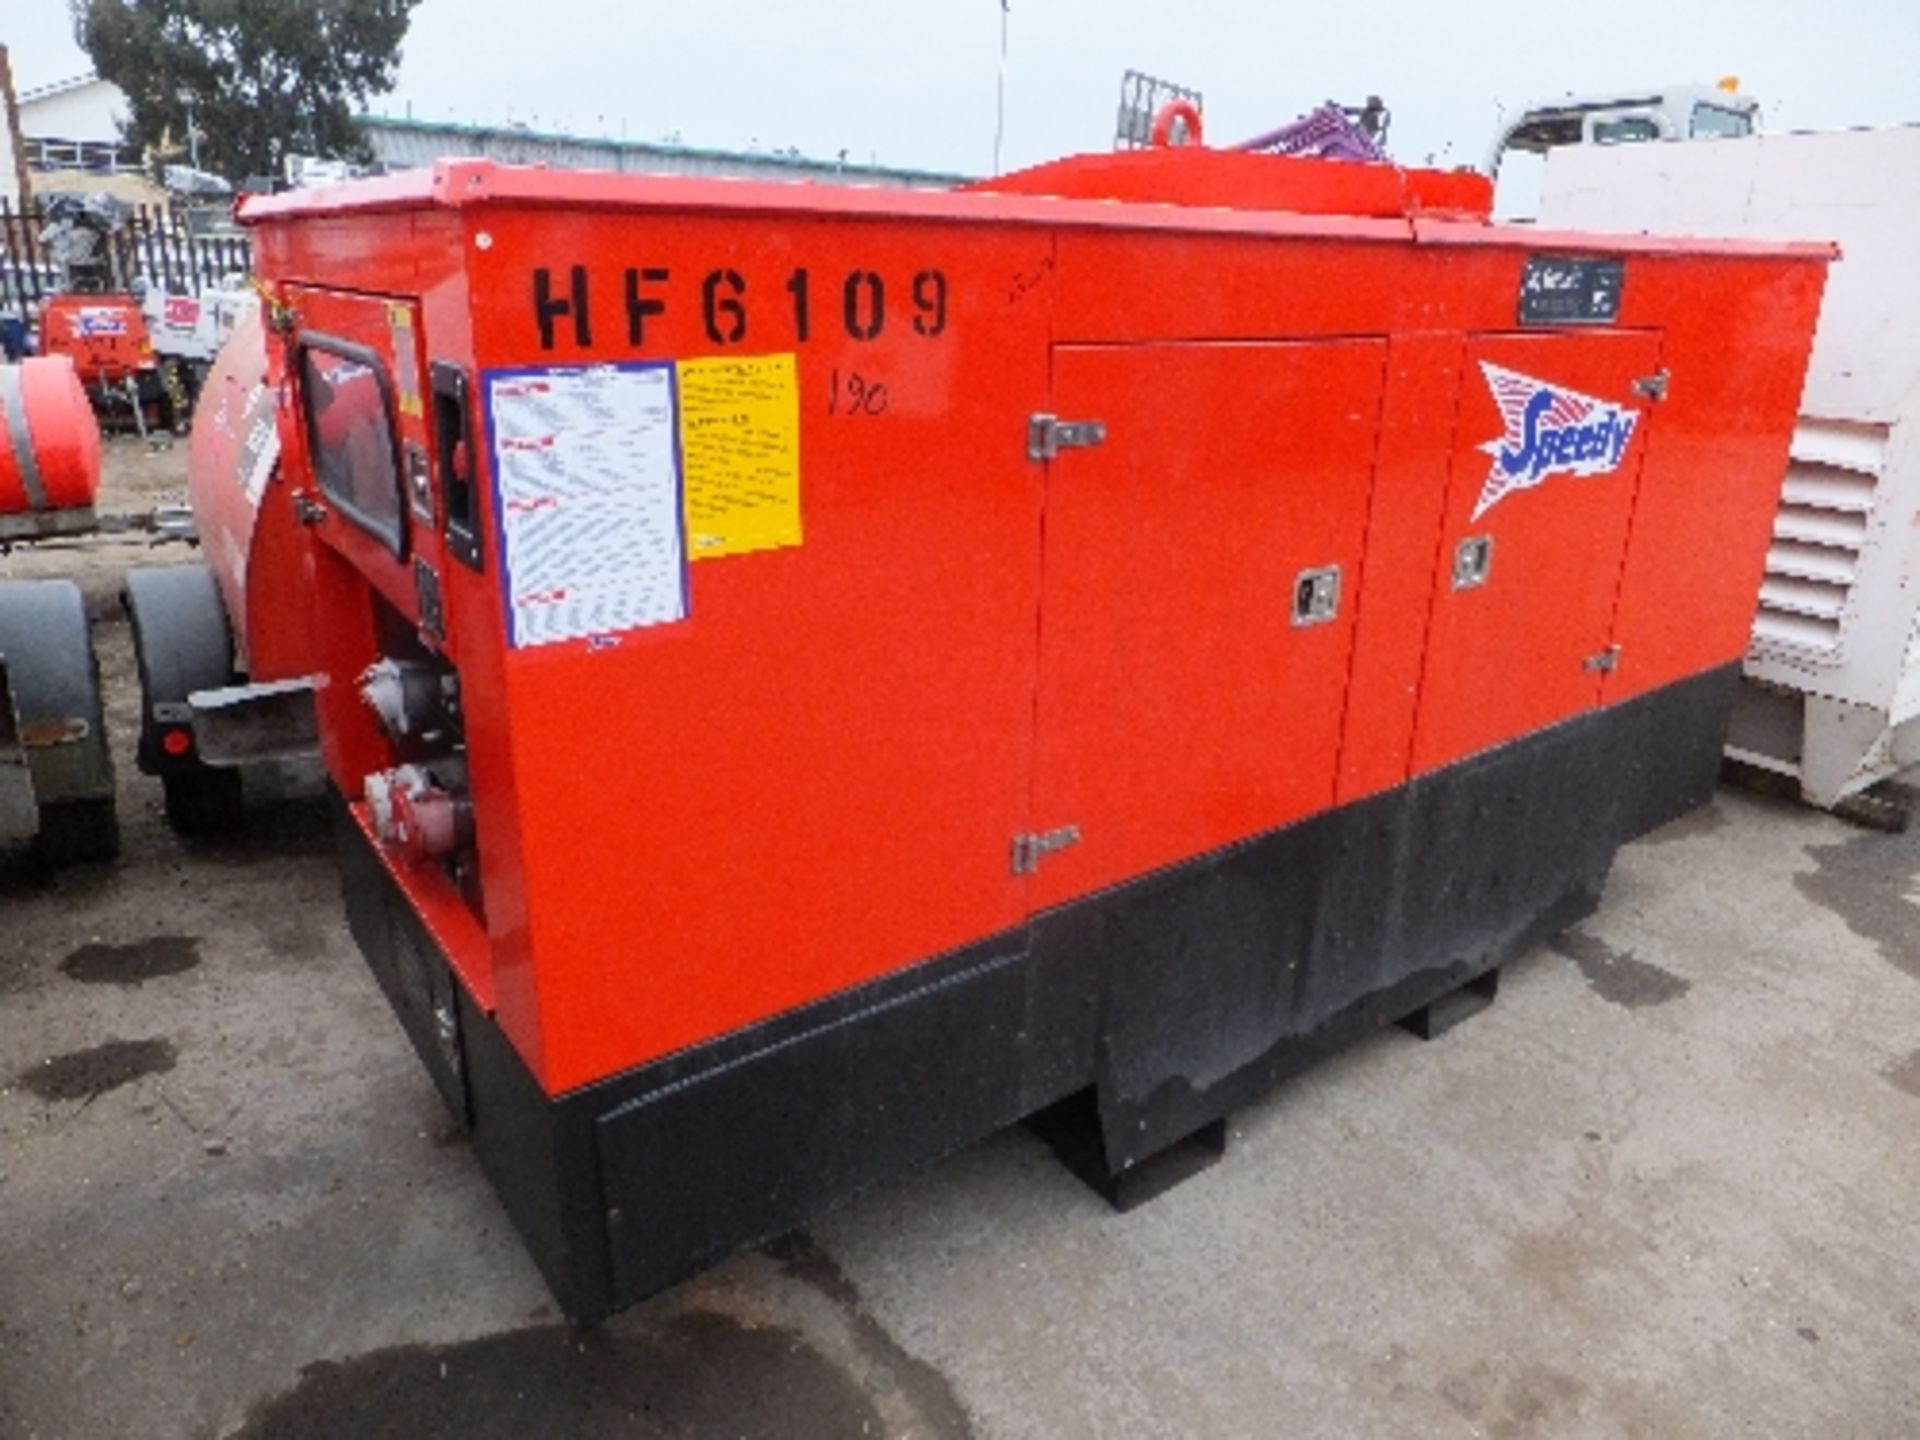 Genset MG115SS-P 100kva generator
Complete - parts of panel missing
HF6109